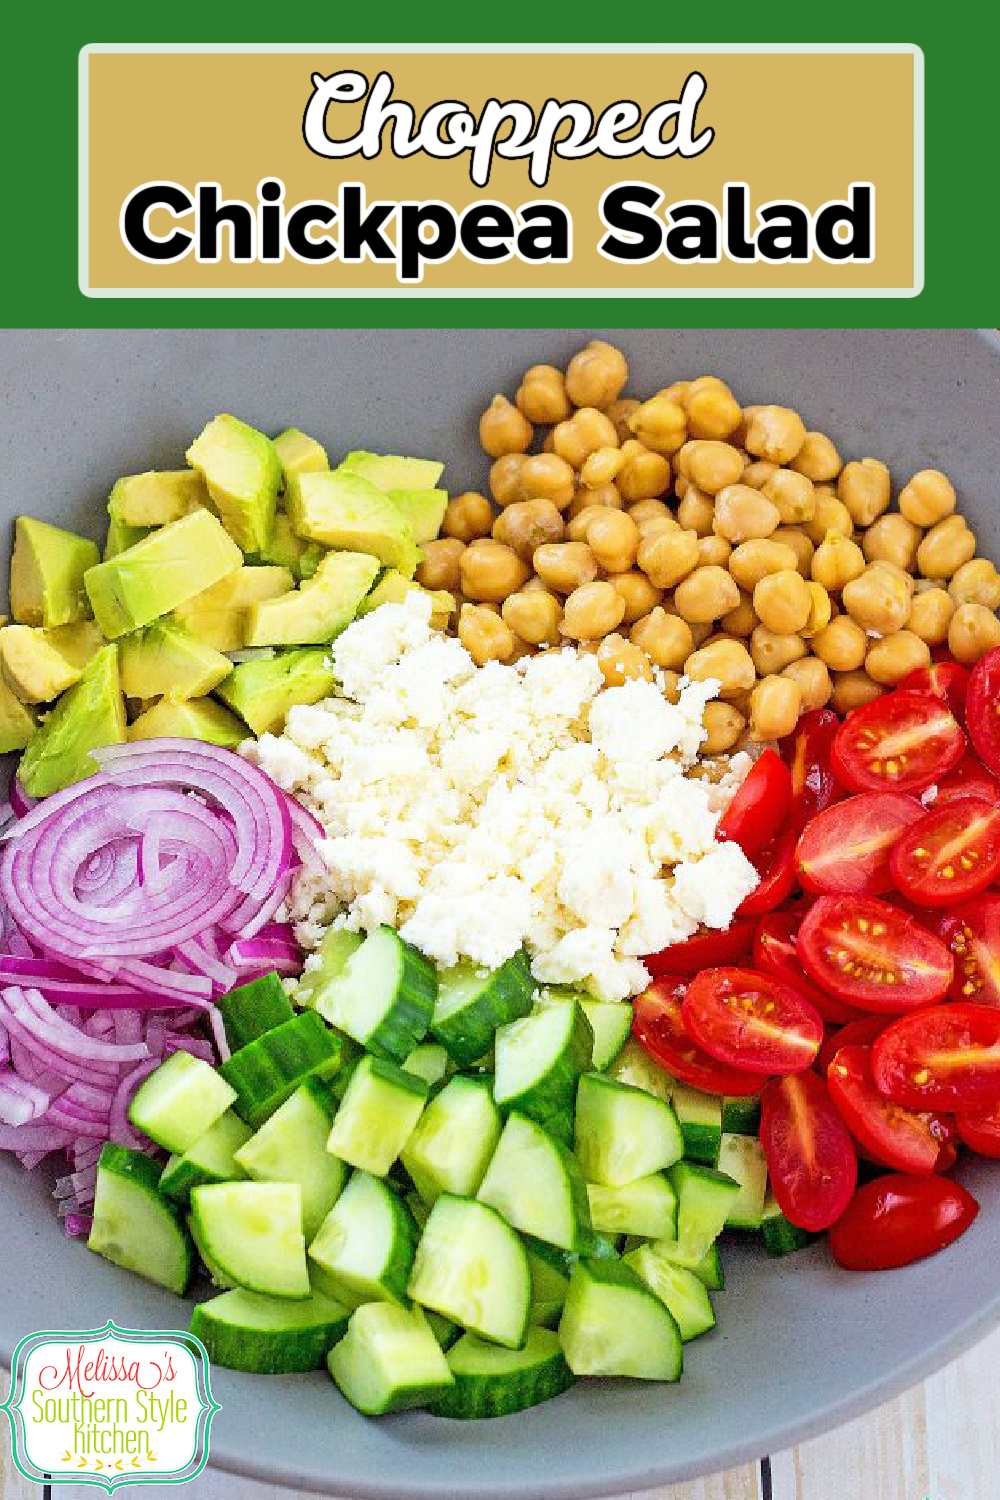 This fresh veggie filled Chopped Chickpea Salad with Avocado can be served as a light side dish or a light meal all in itself #chickpeas #chickpeasalad #saladrecipes #healthysalads #healthyrecipes #vegetarian #avocadorecipes #southernsides #southernrecipes #picnicsides